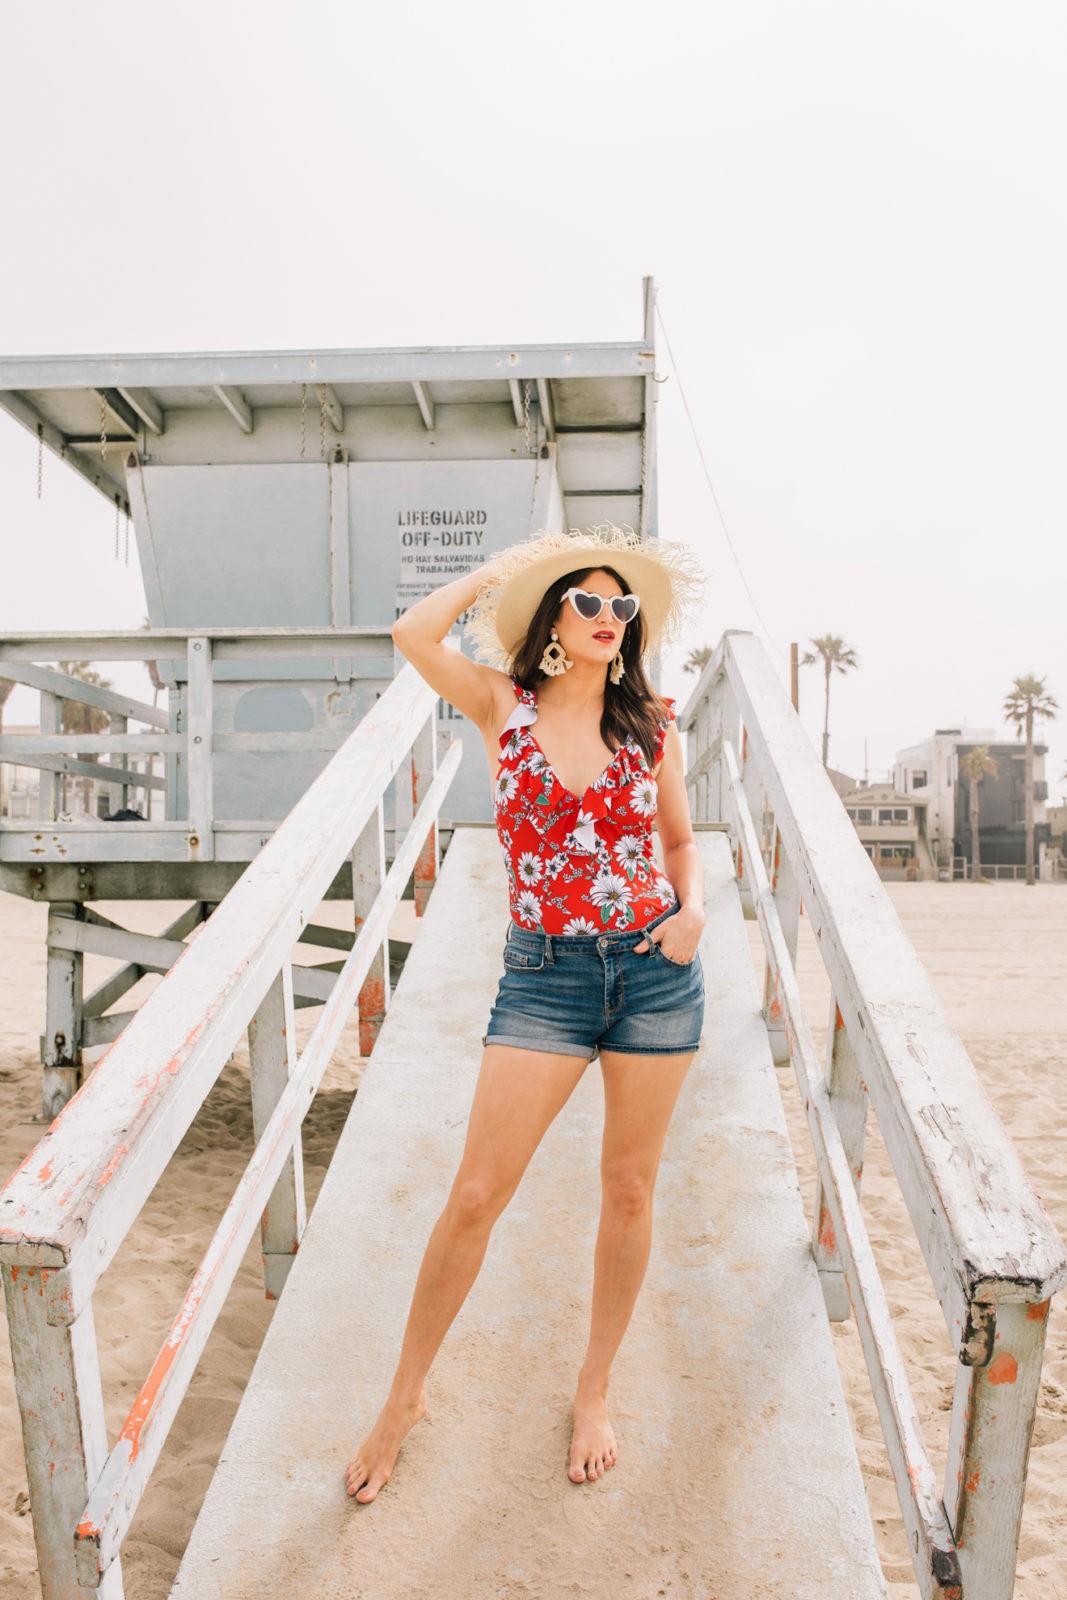 Stage Summer Moments, 2019 Summer Bucket List Moments by popular Los Angeles Lifestyle Blogger Laura Lily: image of woman standing on lifeguard tower ramp at the beach and wearing a Stage Stores red daisy print one piece swimsuit with ruffle details, white heart shaped sunglasses, straw sun hat, tassel earrings, and cutoff denim shorts. 